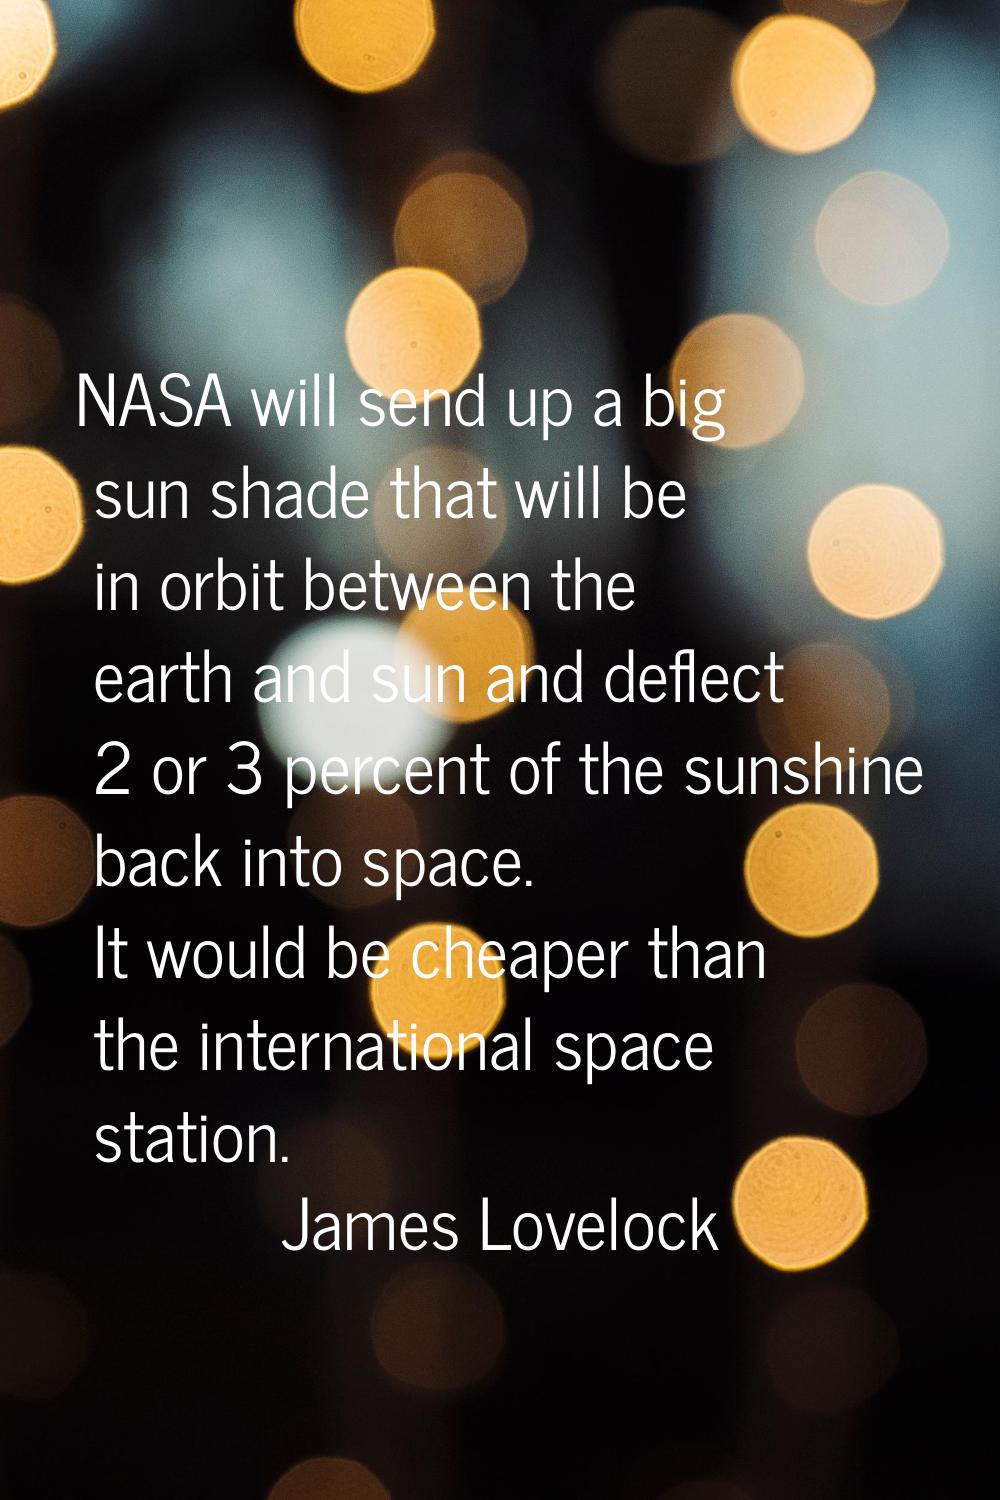 NASA will send up a big sun shade that will be in orbit between the earth and sun and deflect 2 or 